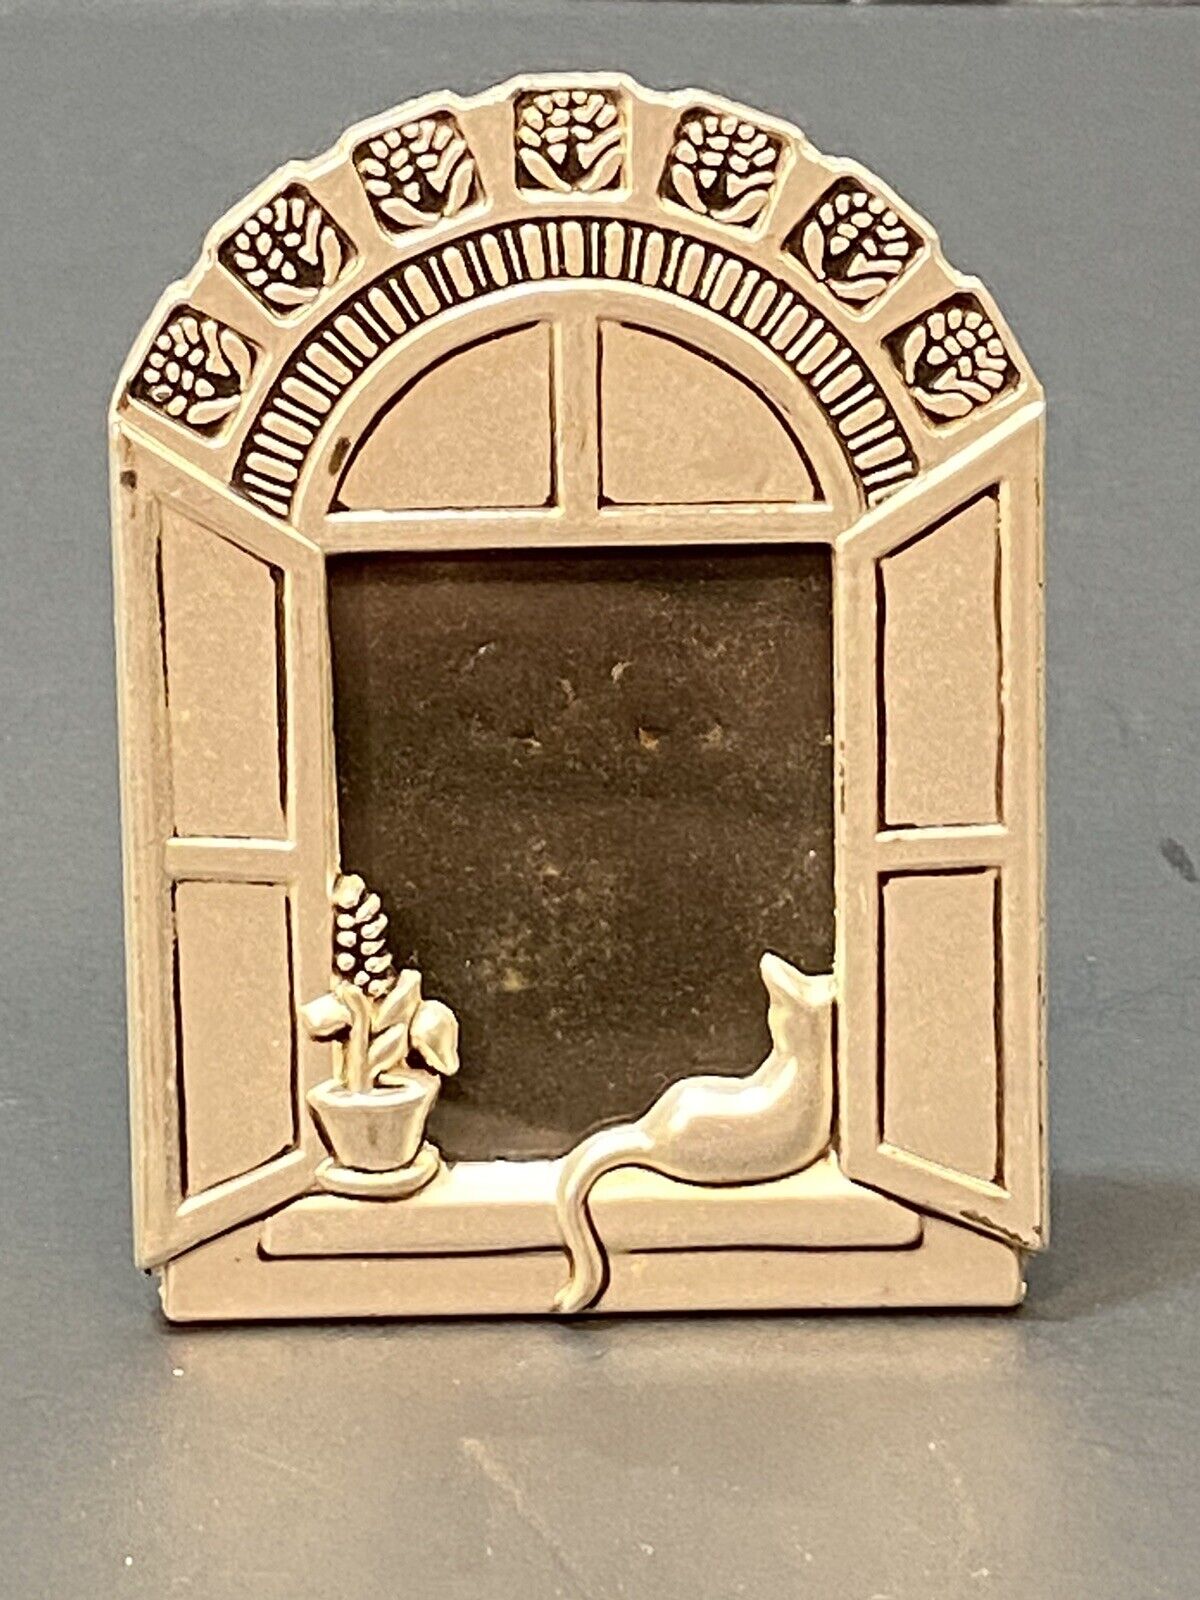 Metal Detailed Miniature Kitty Cat And Plant In Window Picture Frame Silver